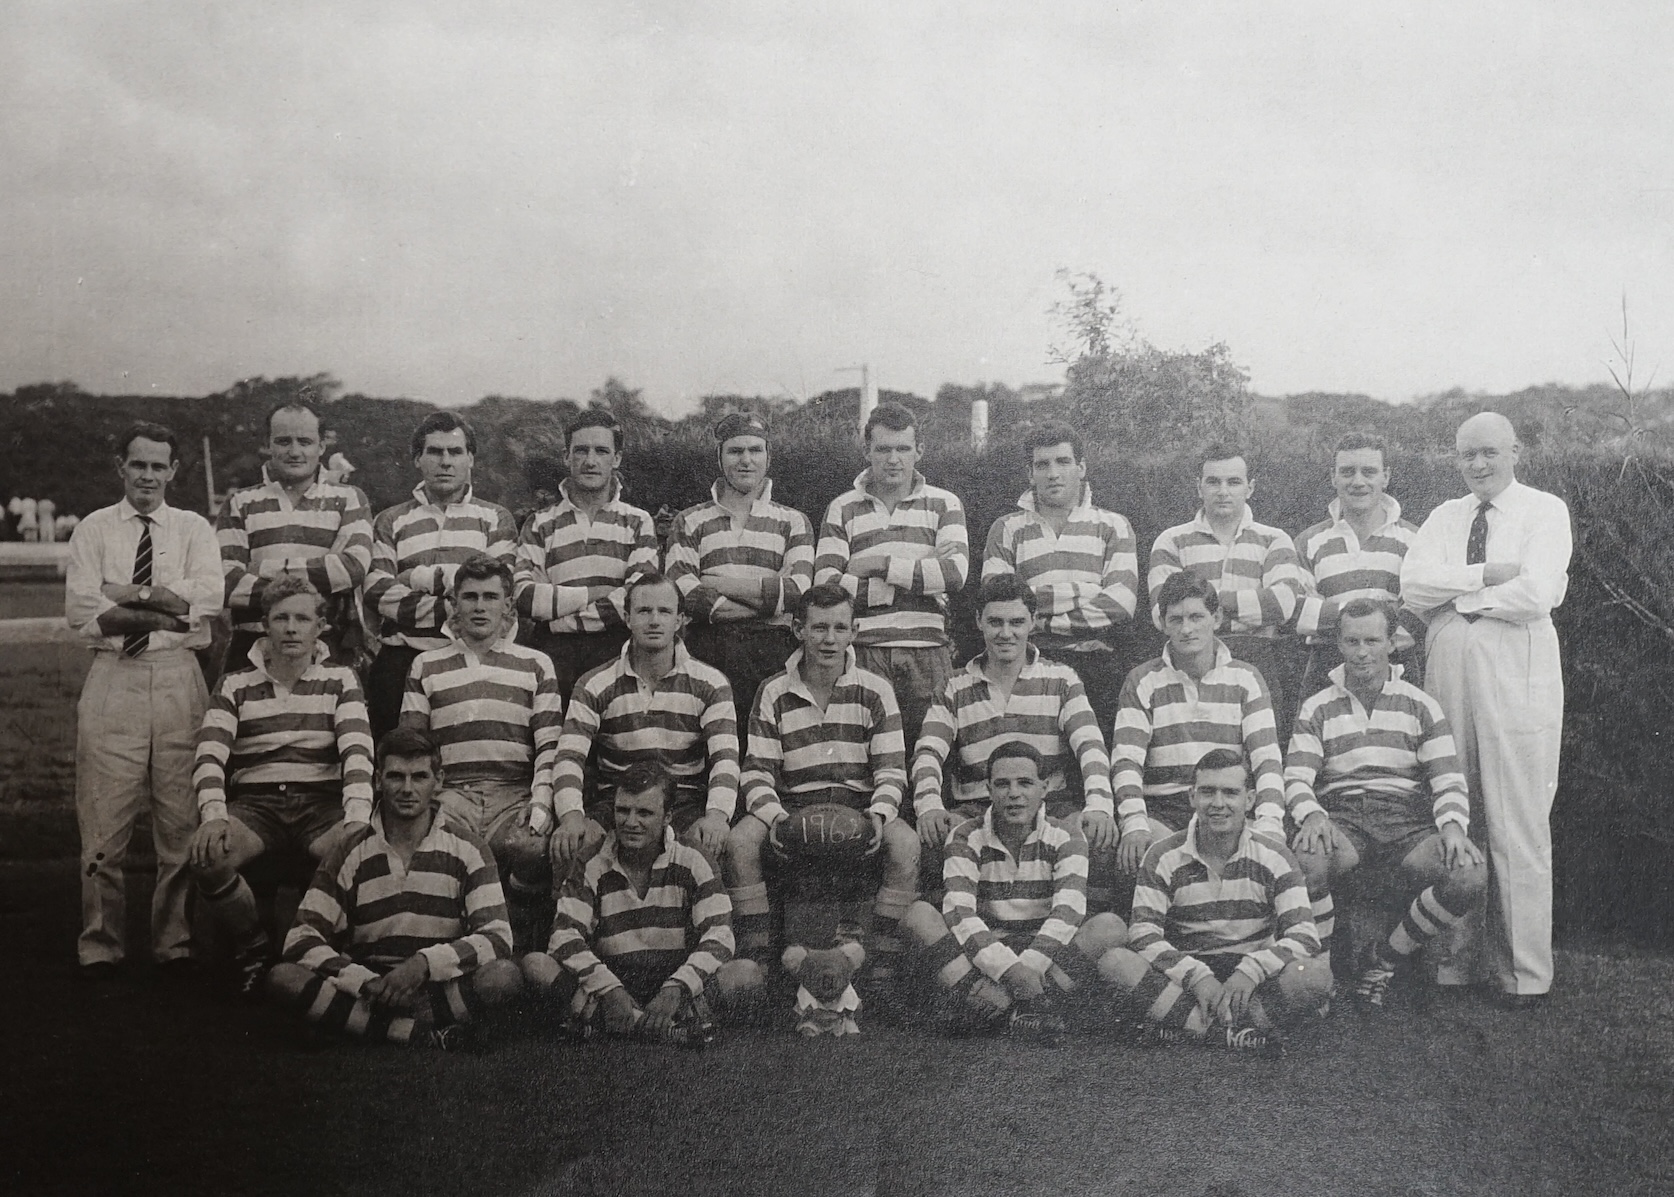 A collection of Photographs of Rugby teams including England vs Scotland 1962